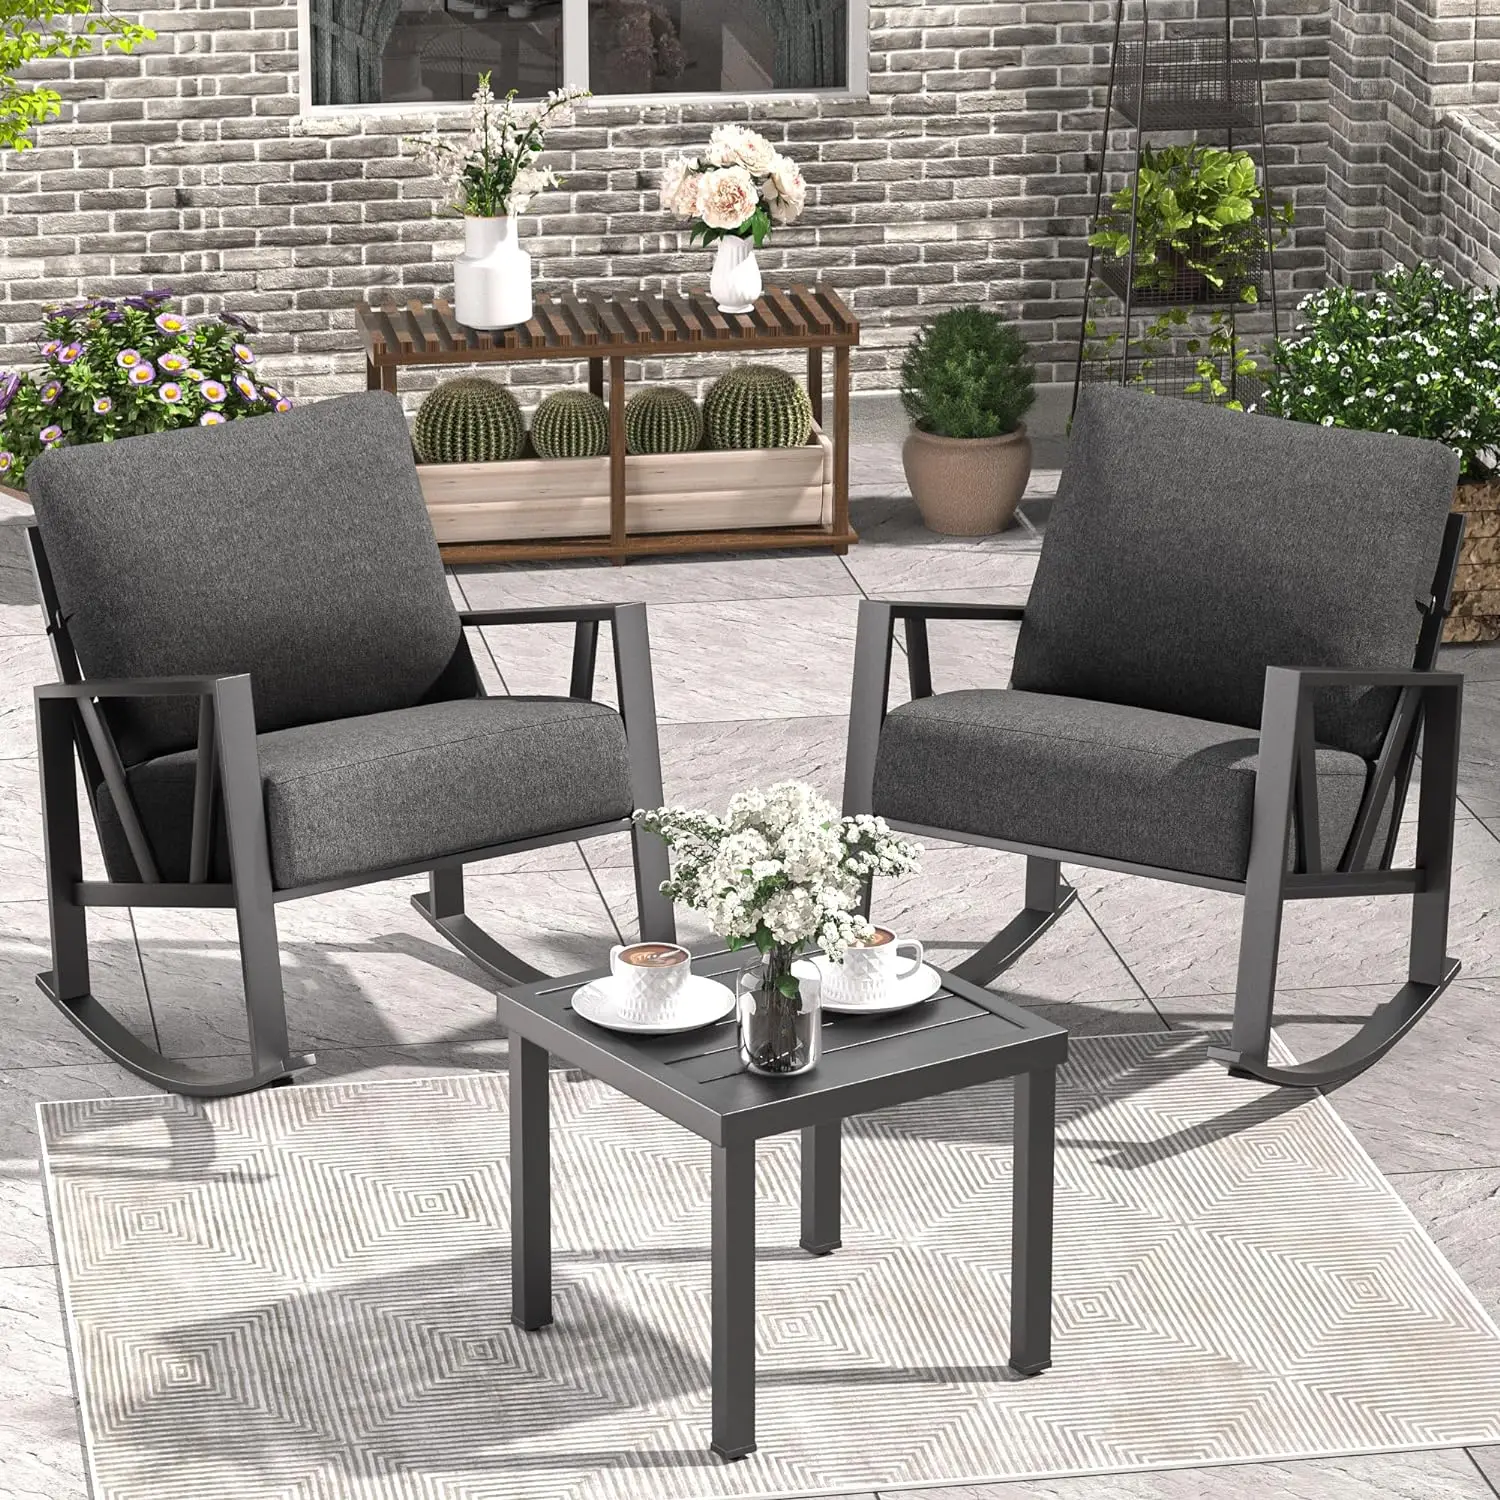 

Patio Porch Furniture Set, Outdoor Rocking Chairs Set of 2 with Coffee Table, 3 Piece Metal Outdoor Furniture Set, Grey